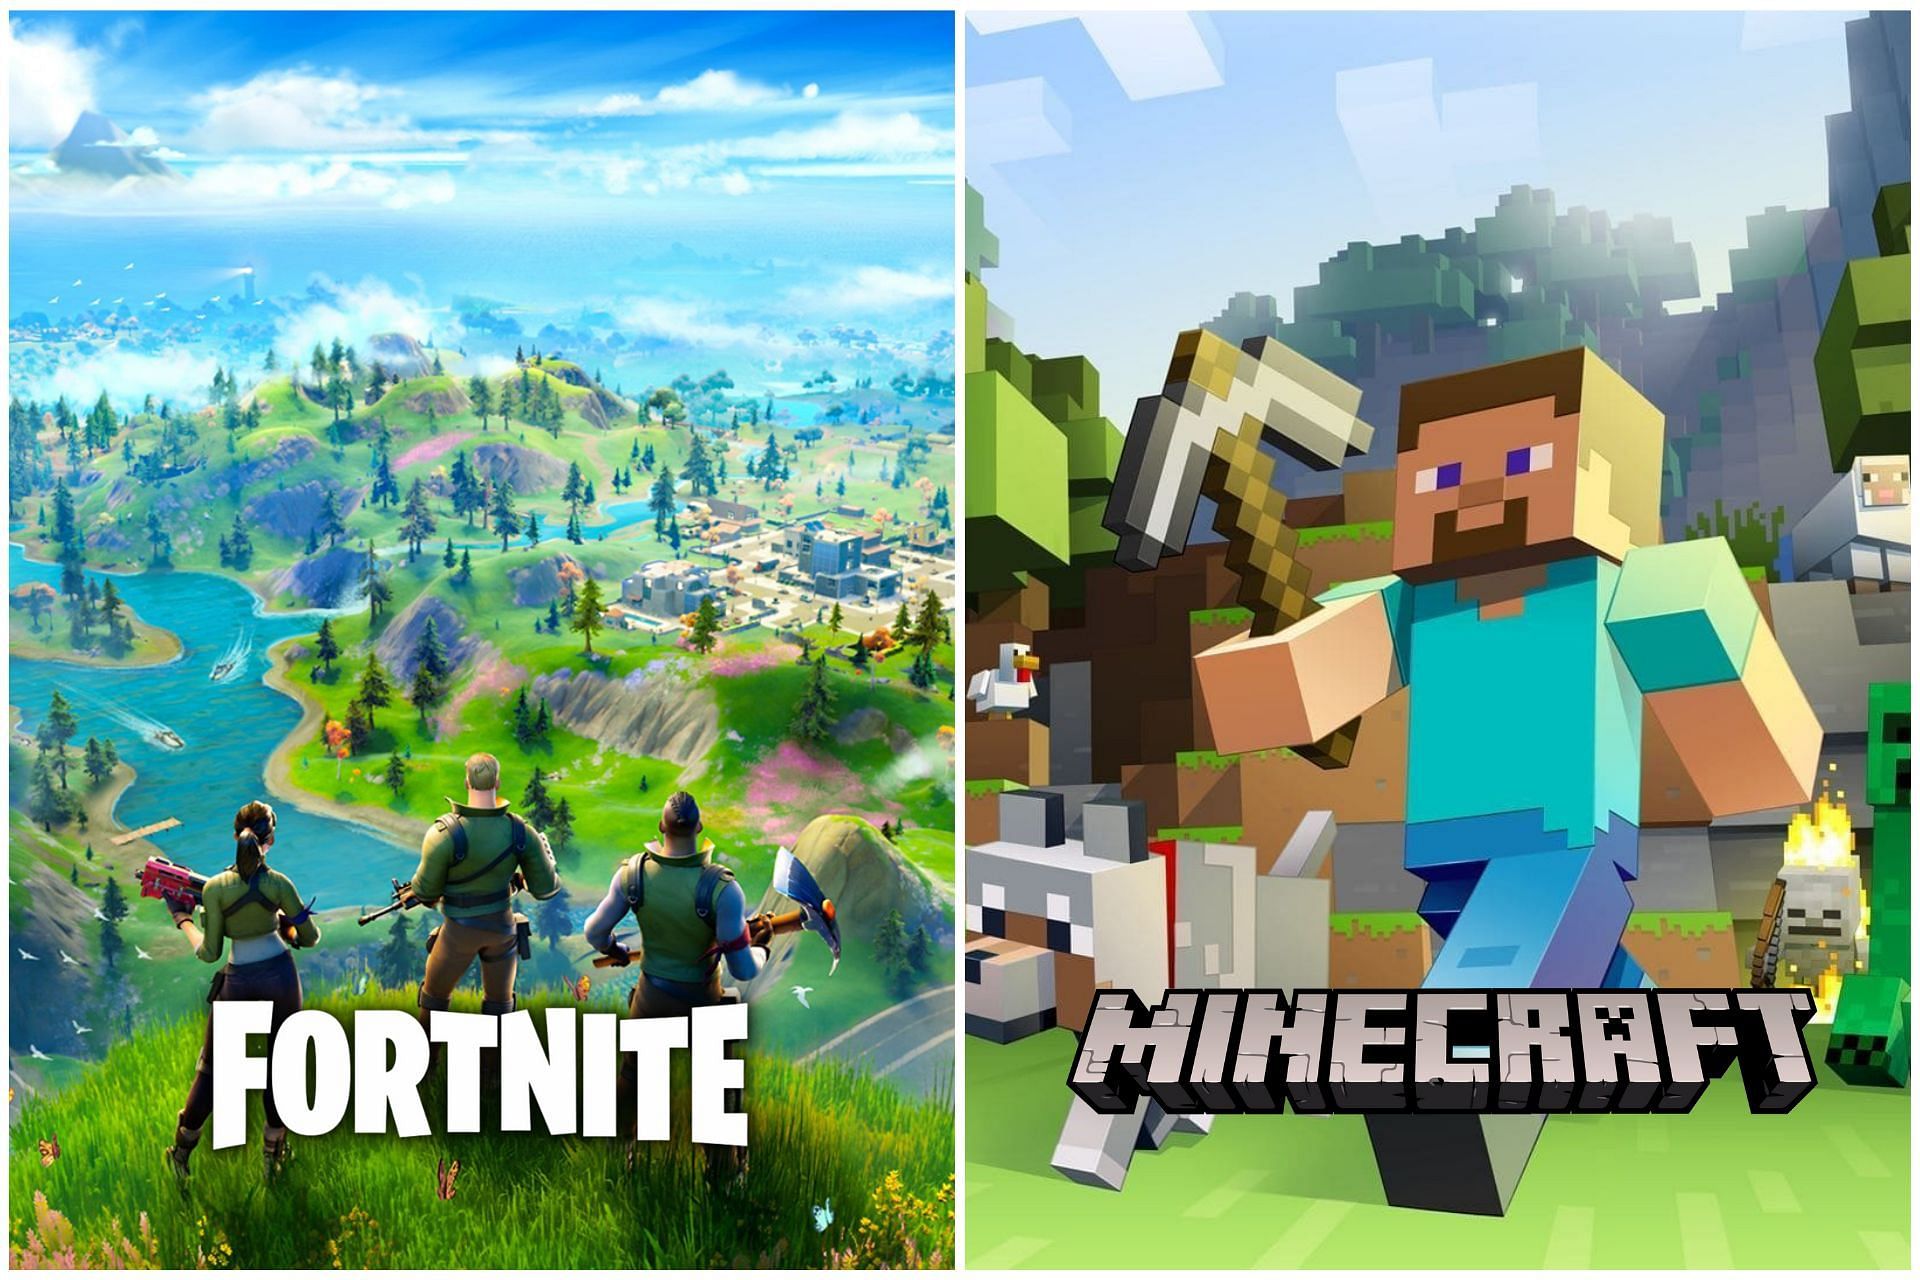 Fans decide which game between Fortnite and Minecraft is better (Image via Sportskeeda)